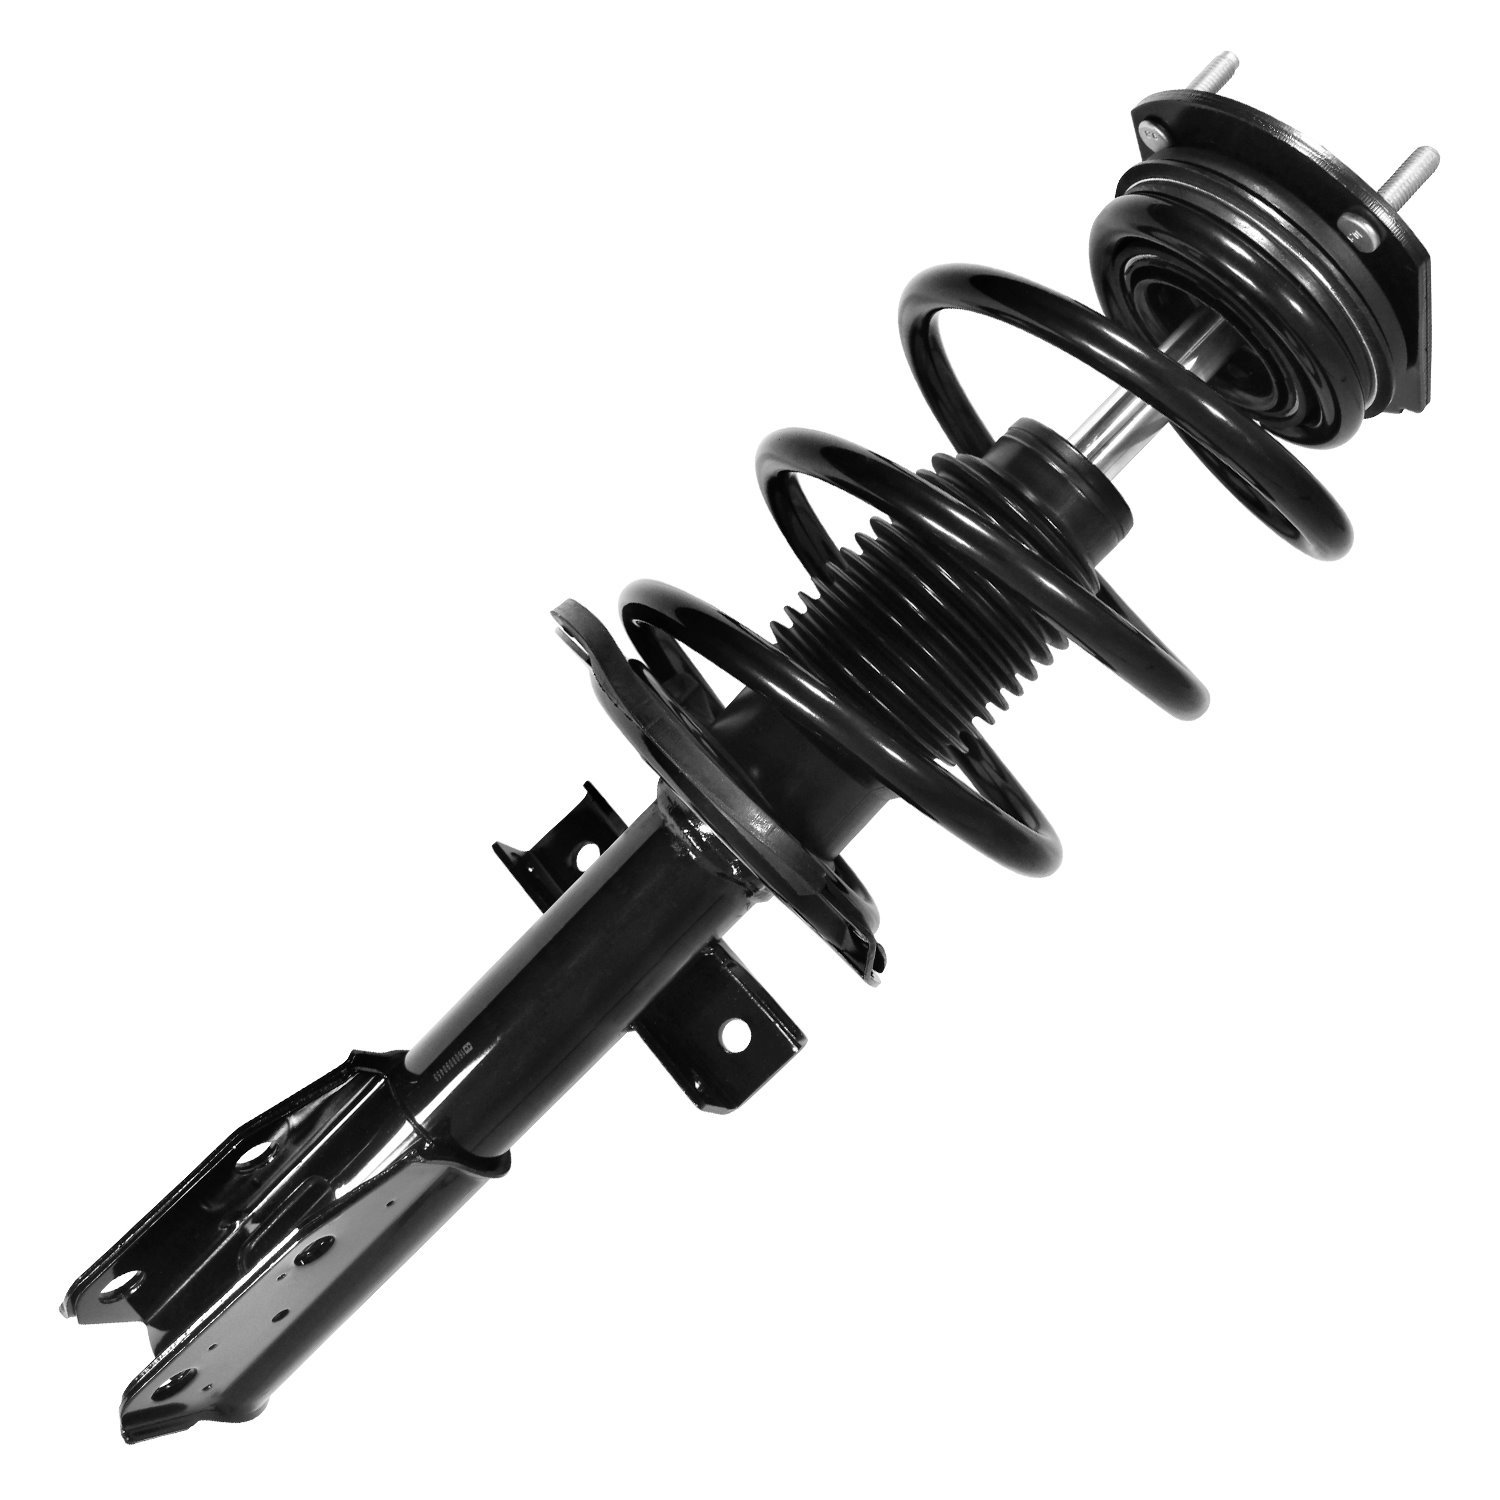 11680 Suspension Strut & Coil Spring Assembly Fits Select Buick Enclave, Chevy Traverse, GMC Acadia, Saturn Outlook